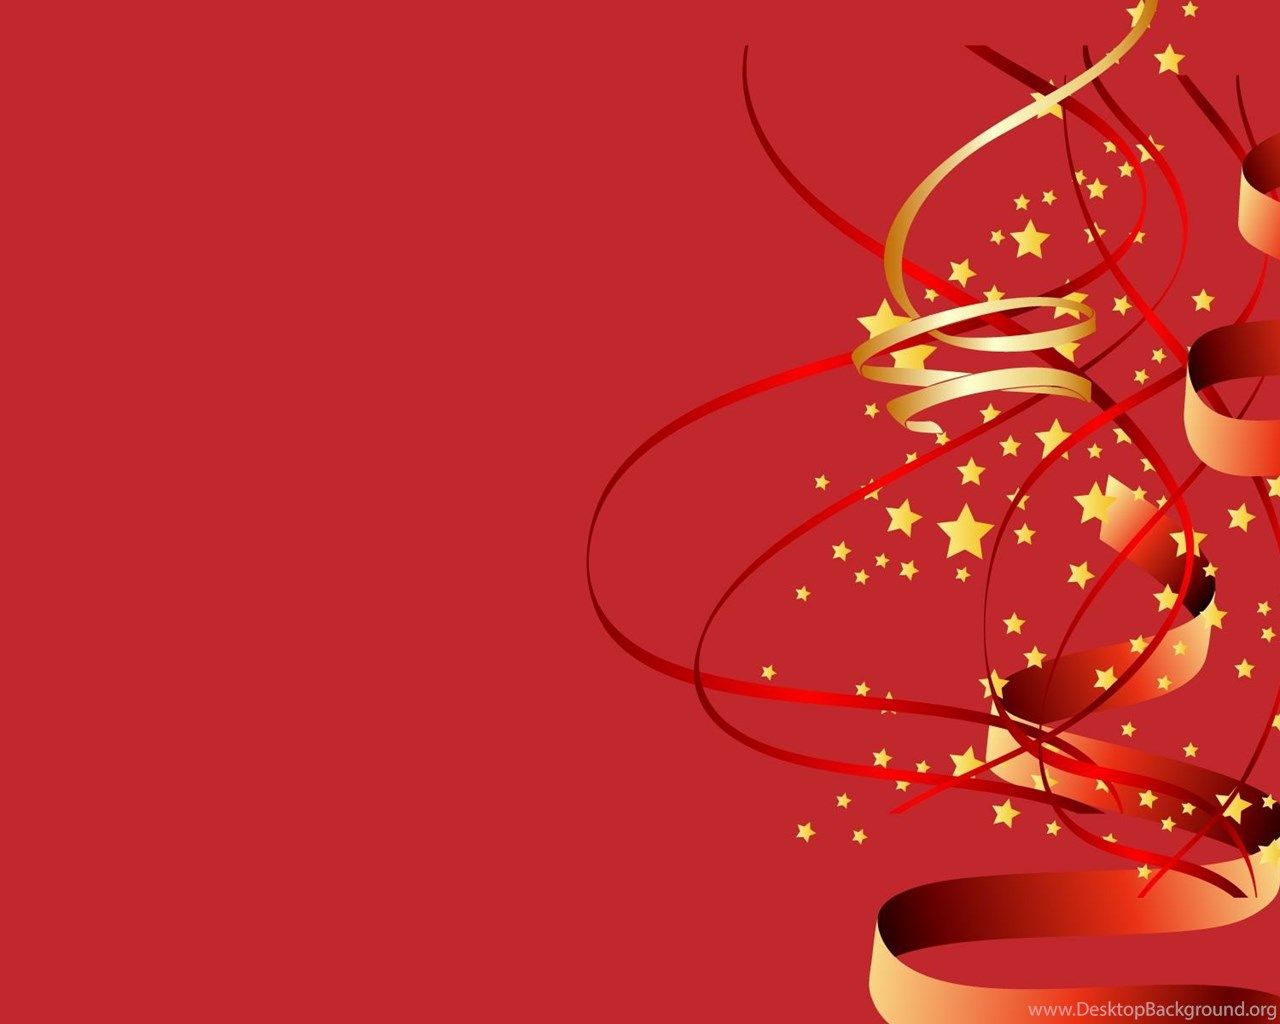 HD Wallpaper For Chinese New Year Wishes Quotes Greeting Cards. Desktop Background